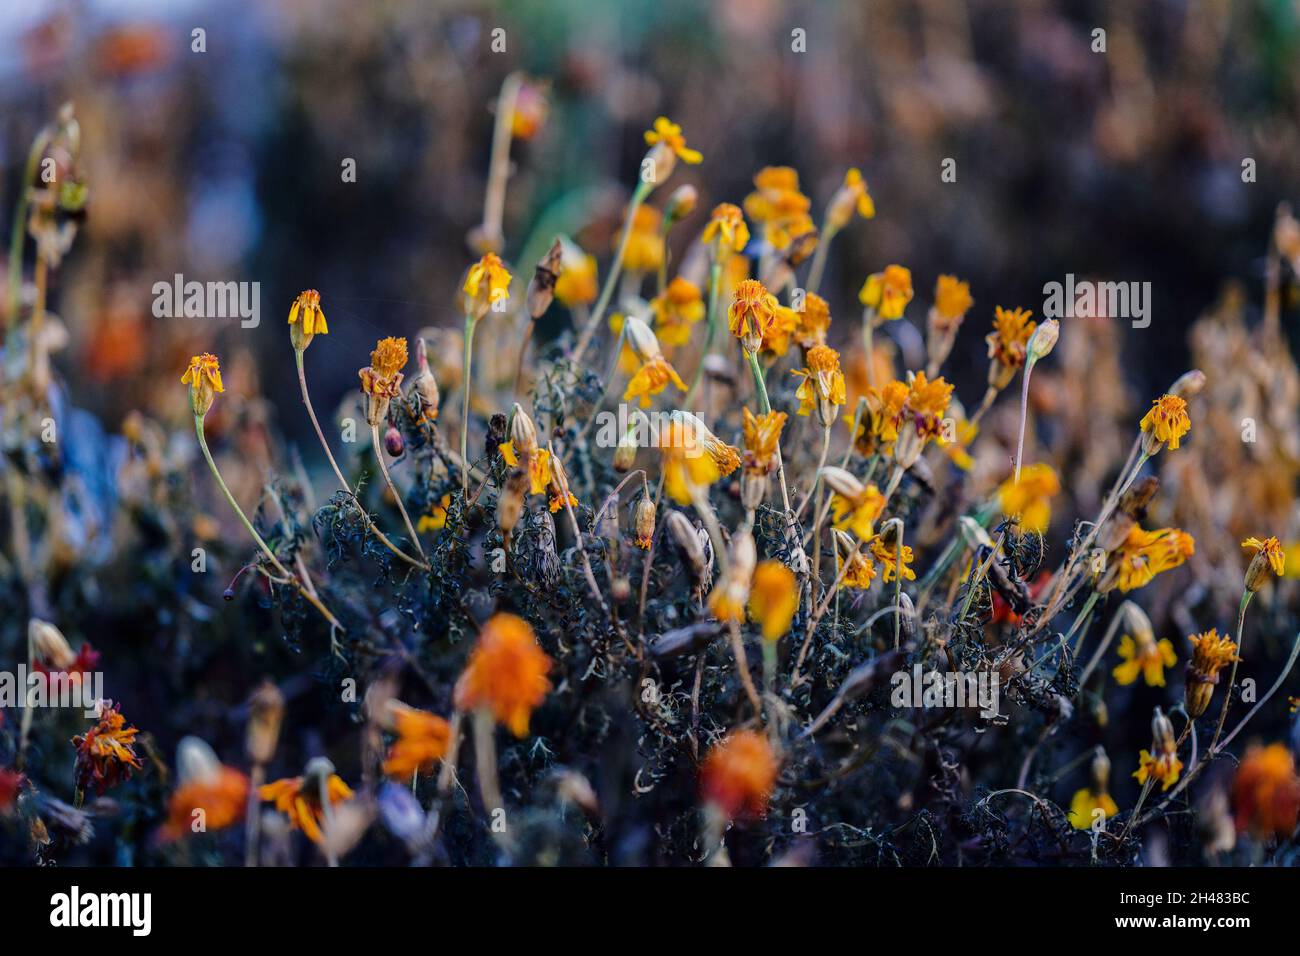 Withered flowers (Marigolds). In the autumn garden at sunset. Selective focus with shallow depth of field. Stock Photo